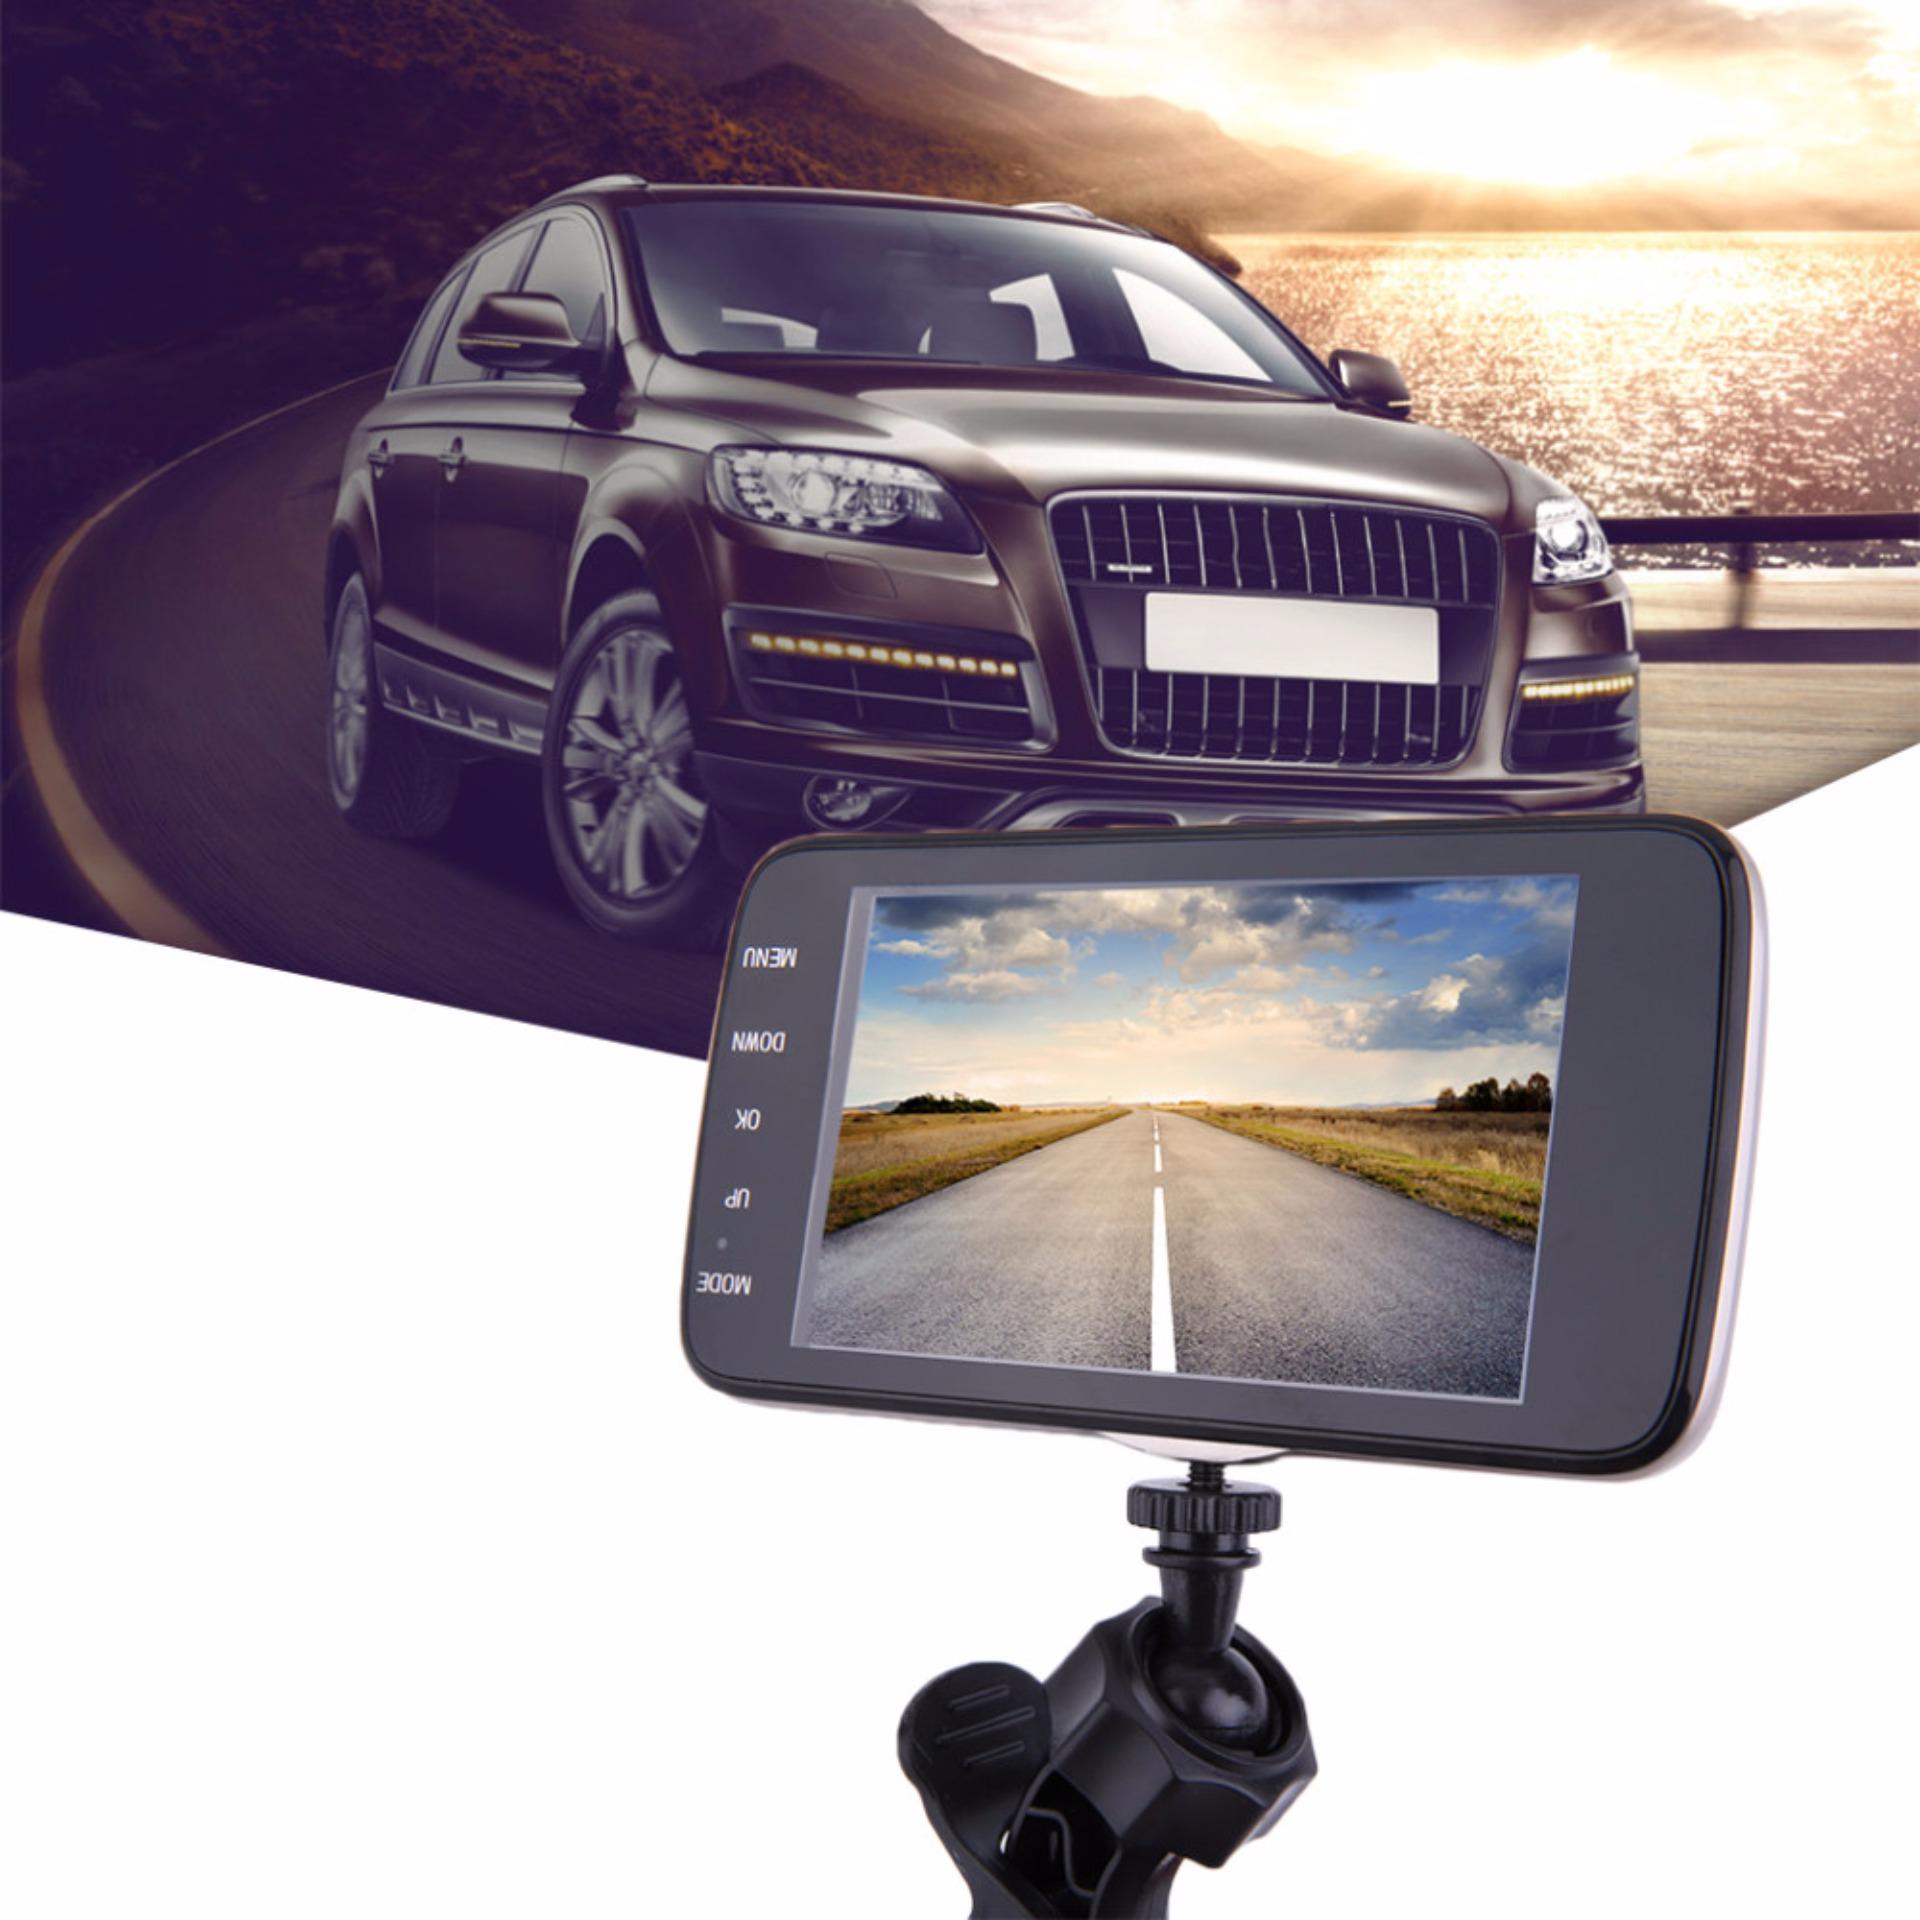 Car Camera High Definition Night Vision Car DVR Driving Recorder Professional Double Lens 4.0 Inch 1080P